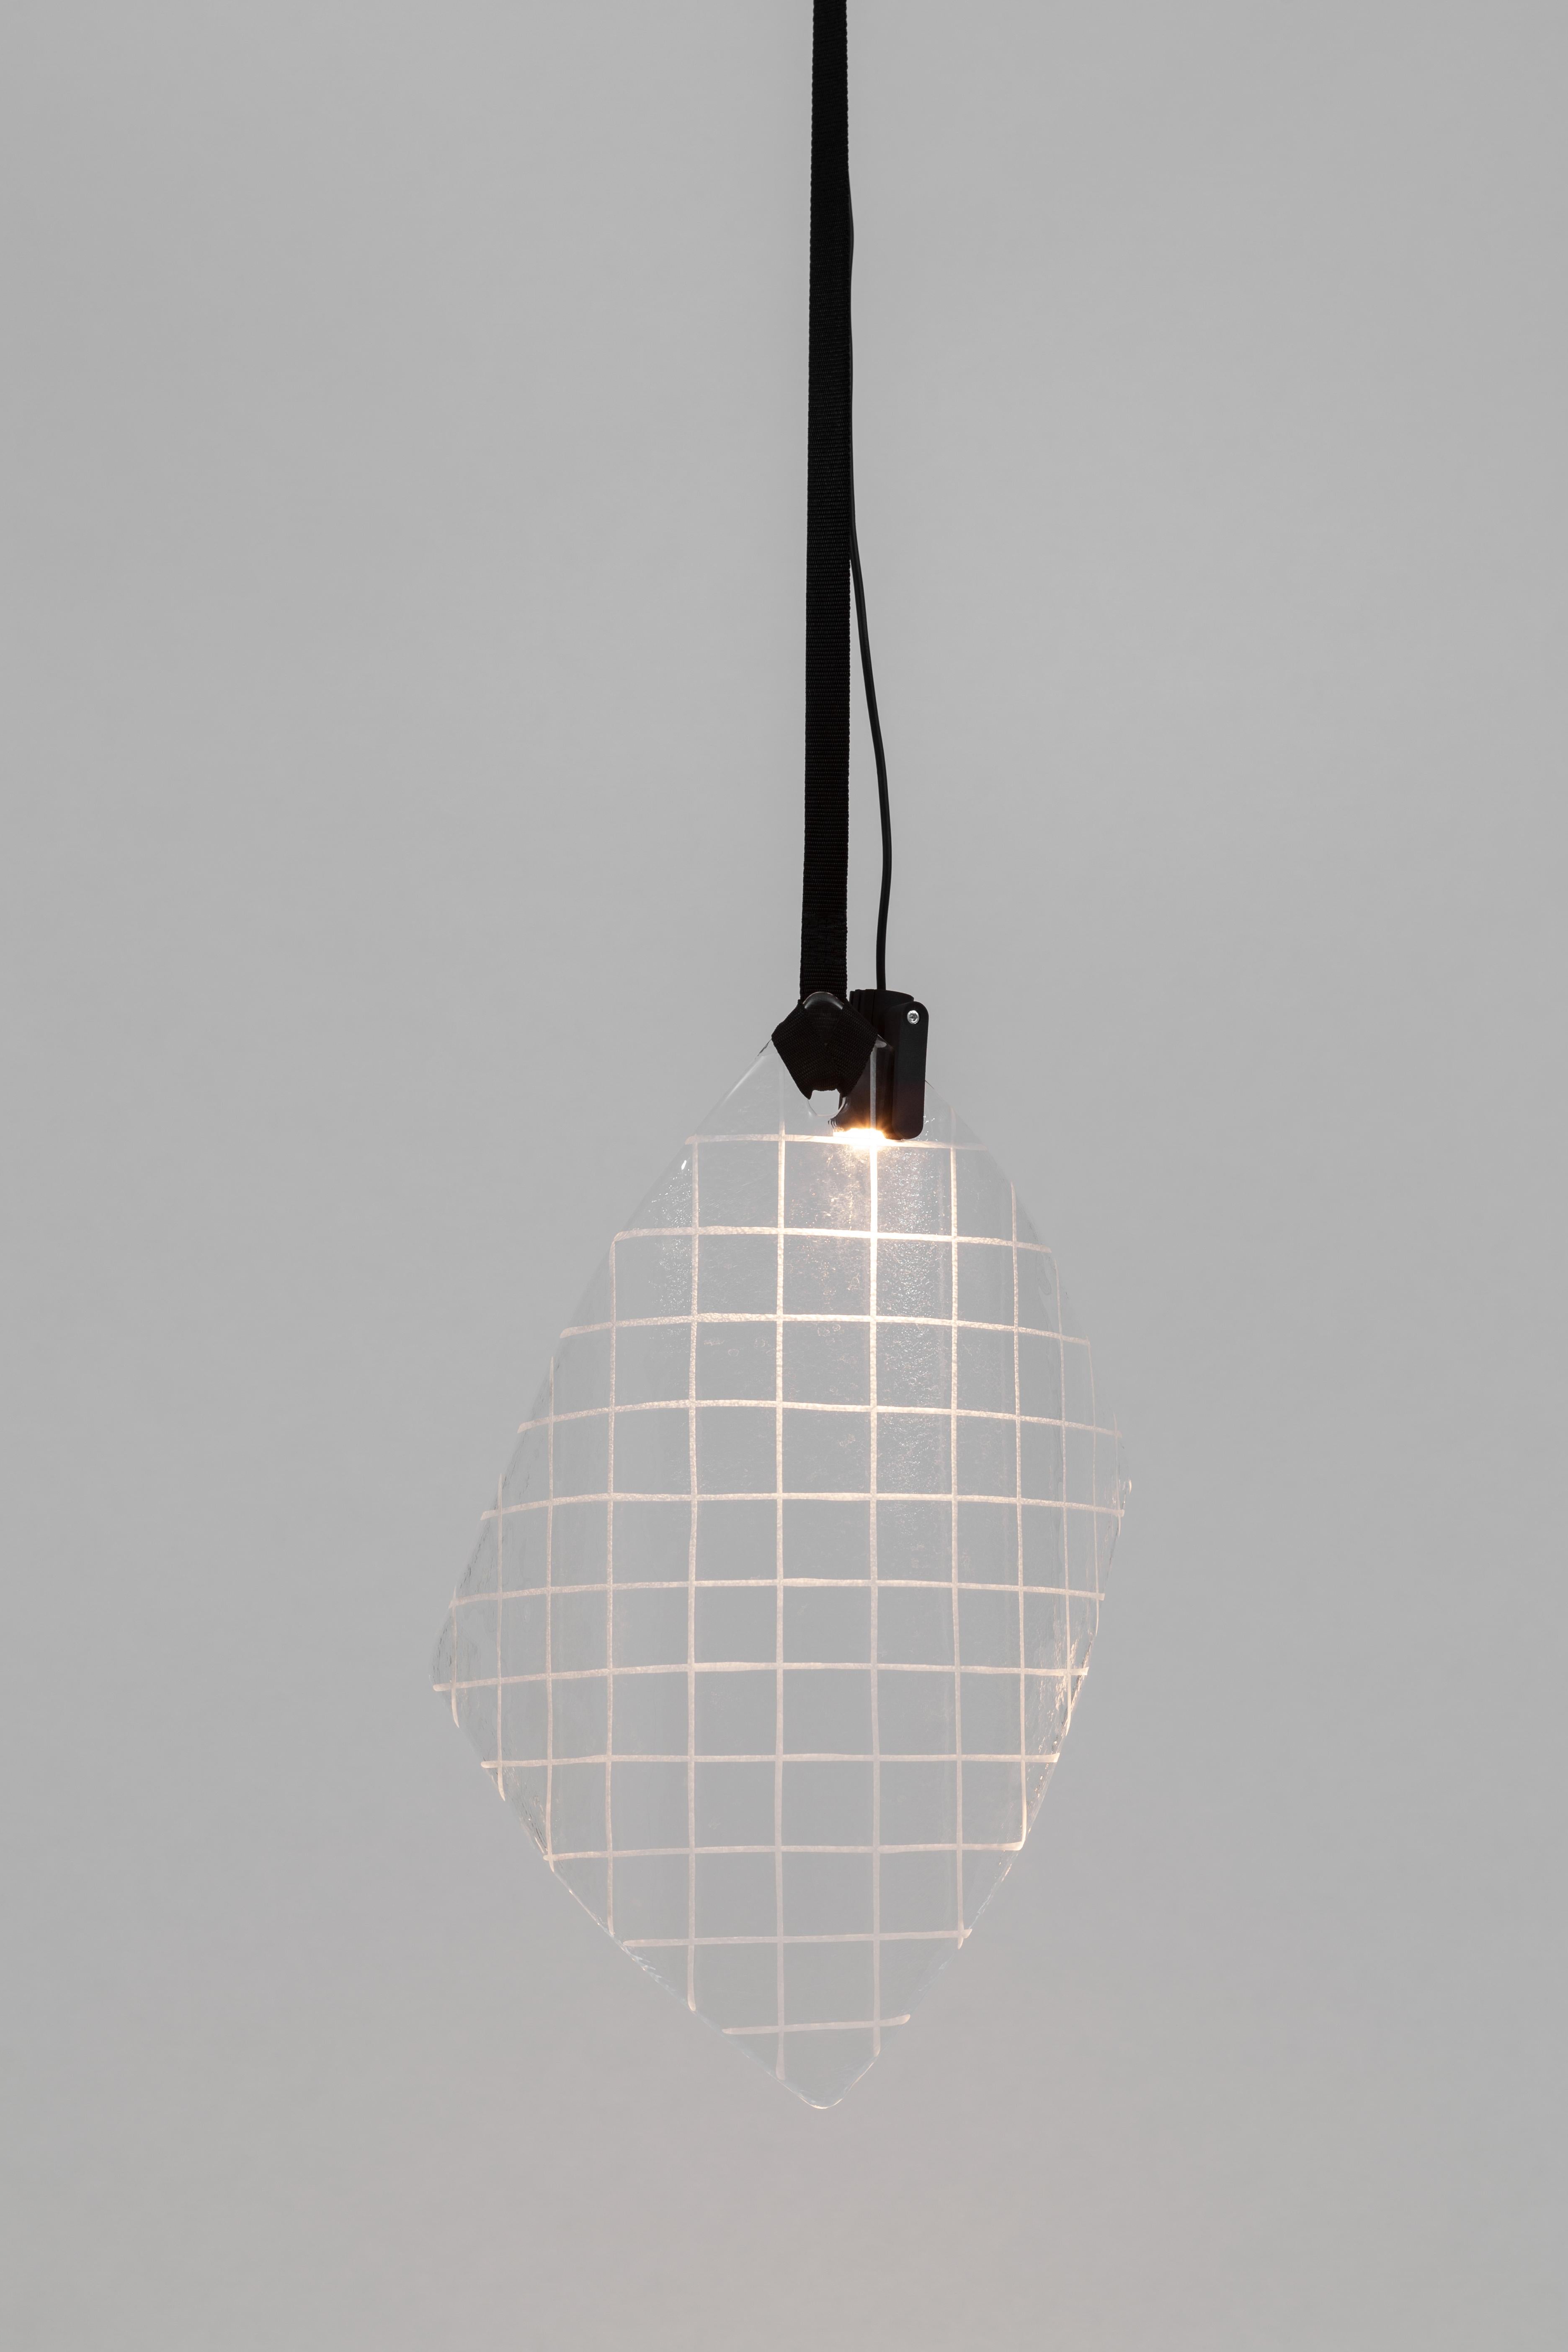 In Lace, Zaven takes inspiration from the longstanding tradition of Venetian lace-making. The resulting lamp is a hanging glass doily lace, whose original flattened shape has been bent down as an effect of gravity and the glass’s own weight. A